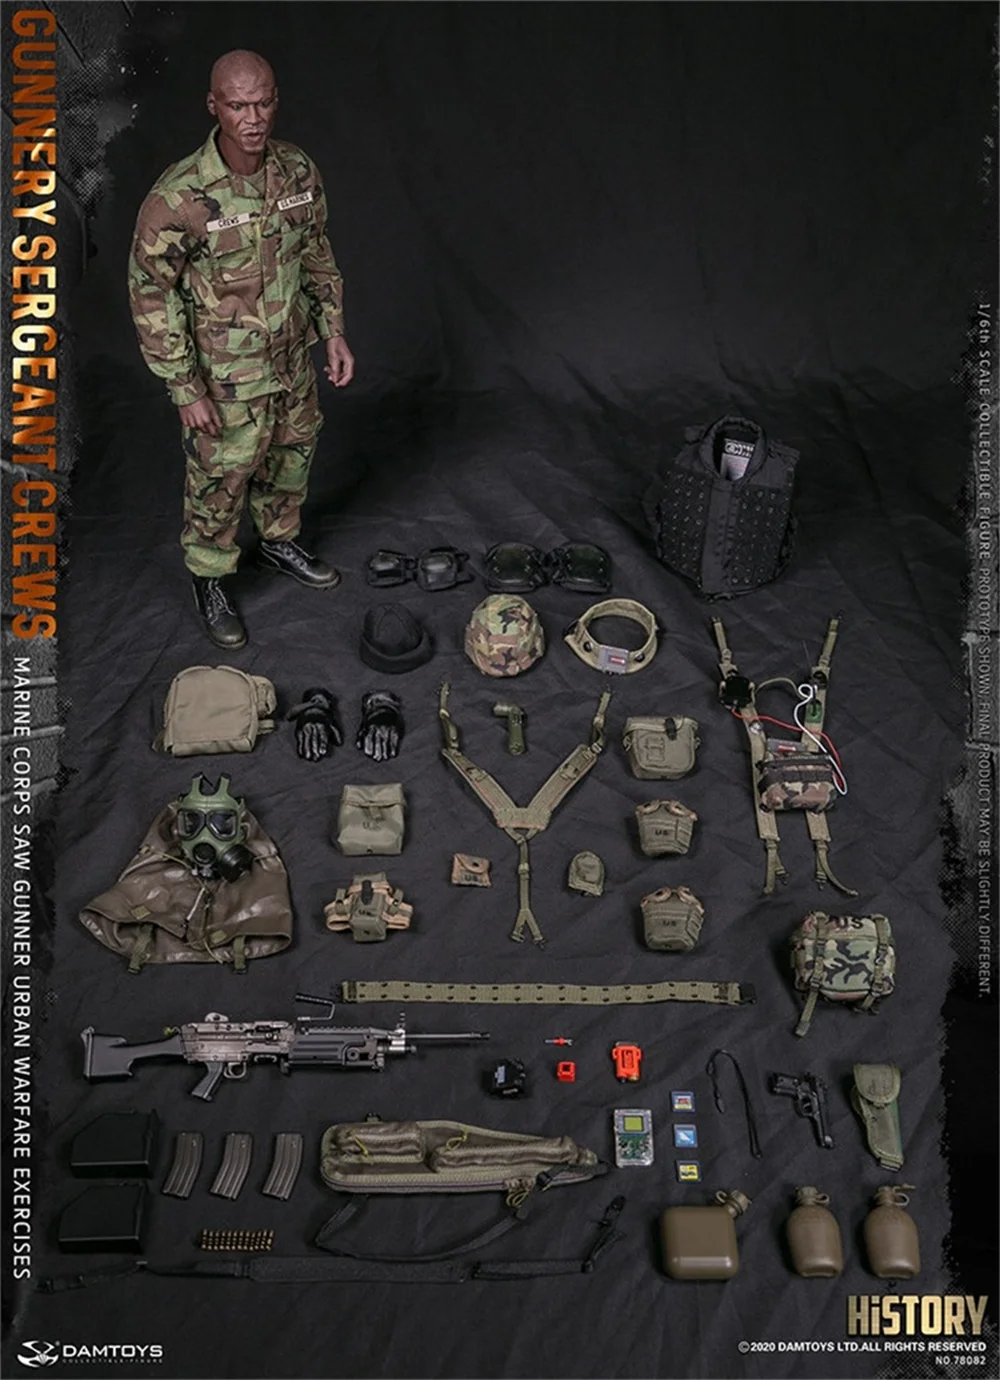 

DAMTOYS 1/6 DAM 78082 Marine Corps Gunner Sergeant Cruise Full Set Moveable Action Figures Gift For Fans Collection